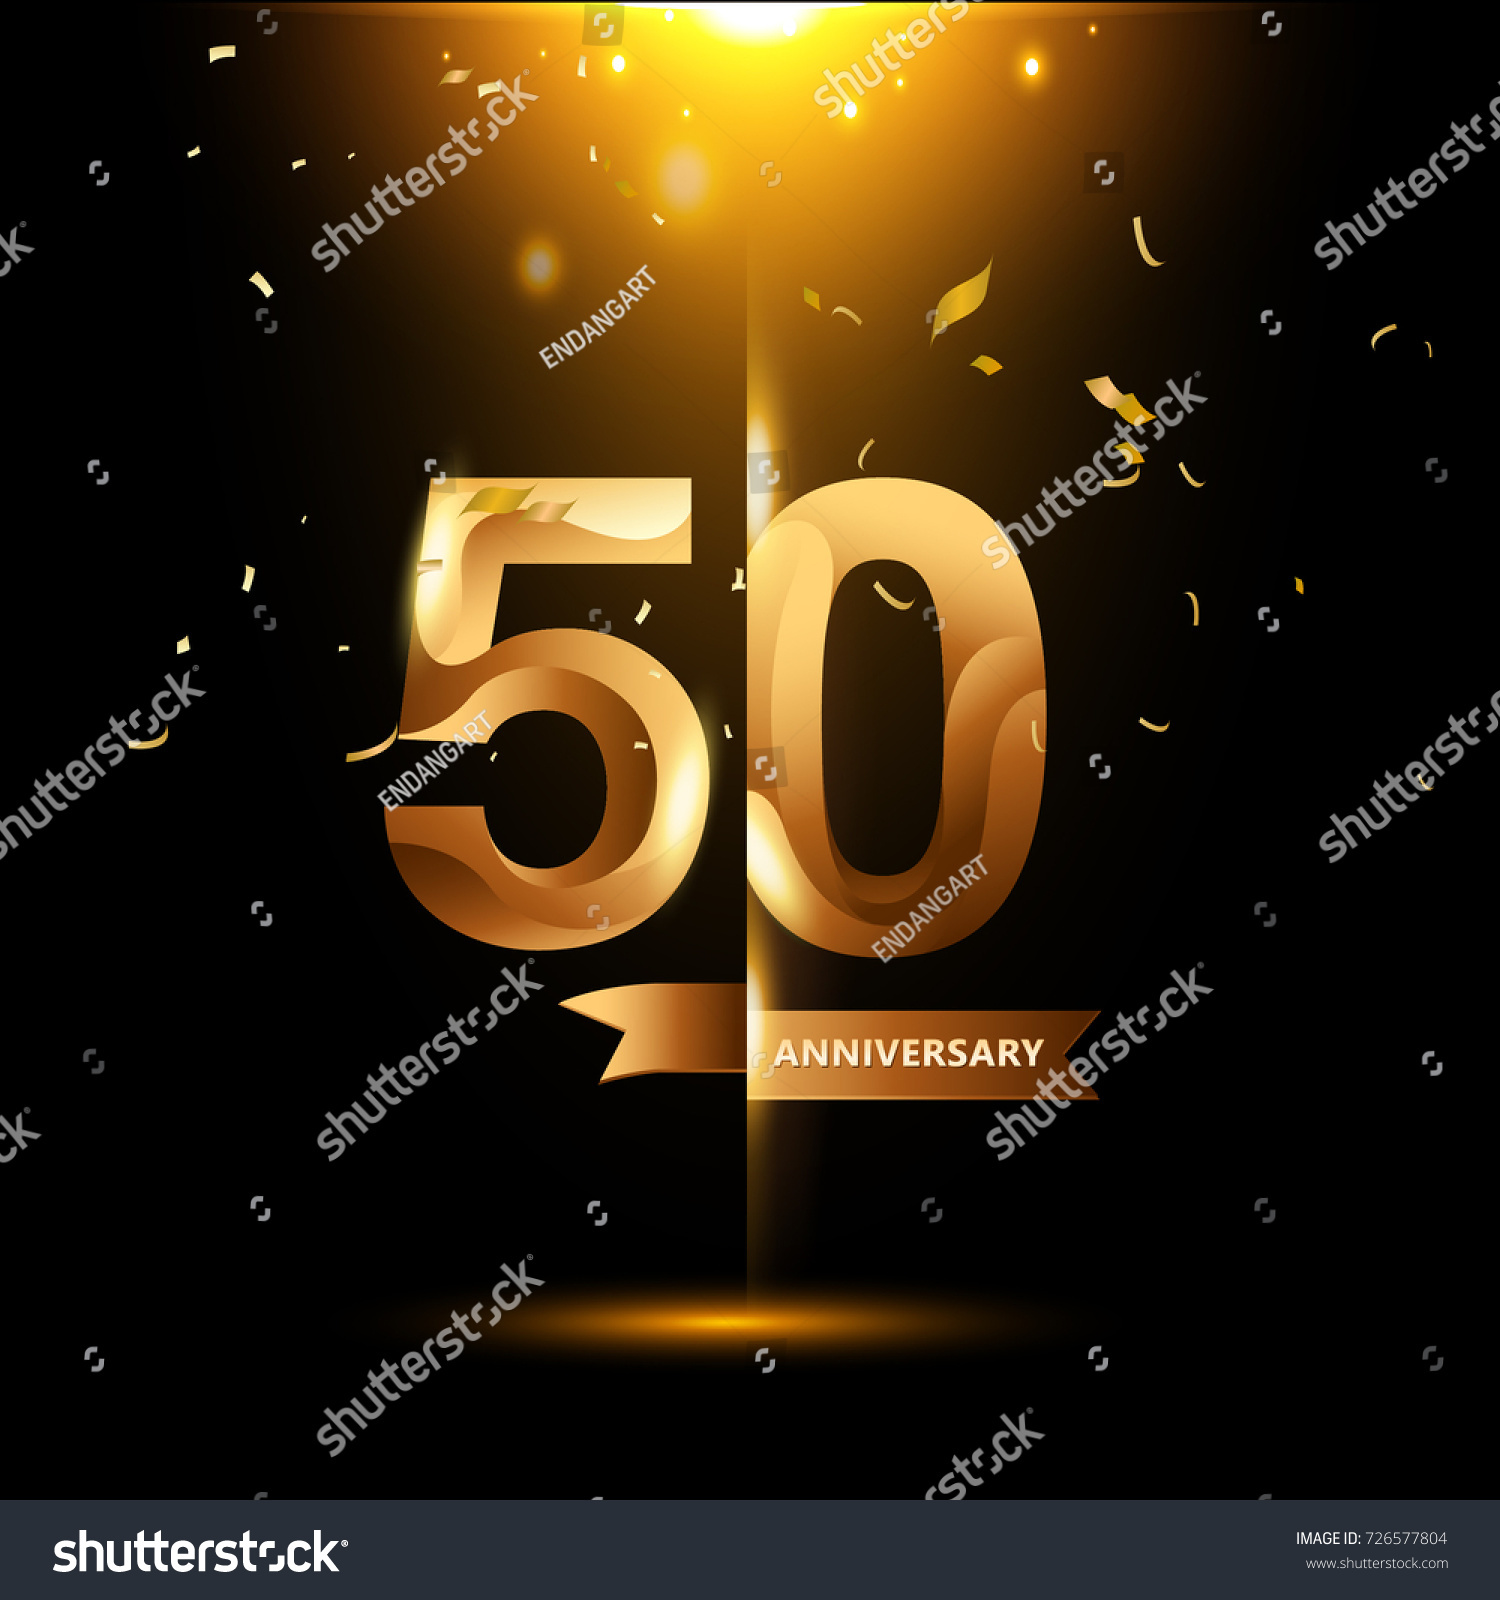 SVG of 50 Years Anniversary with gold stylized number and confetti. Applicable for brochure, flyer, Posters, web and Banner Designs. Vector illustration. svg